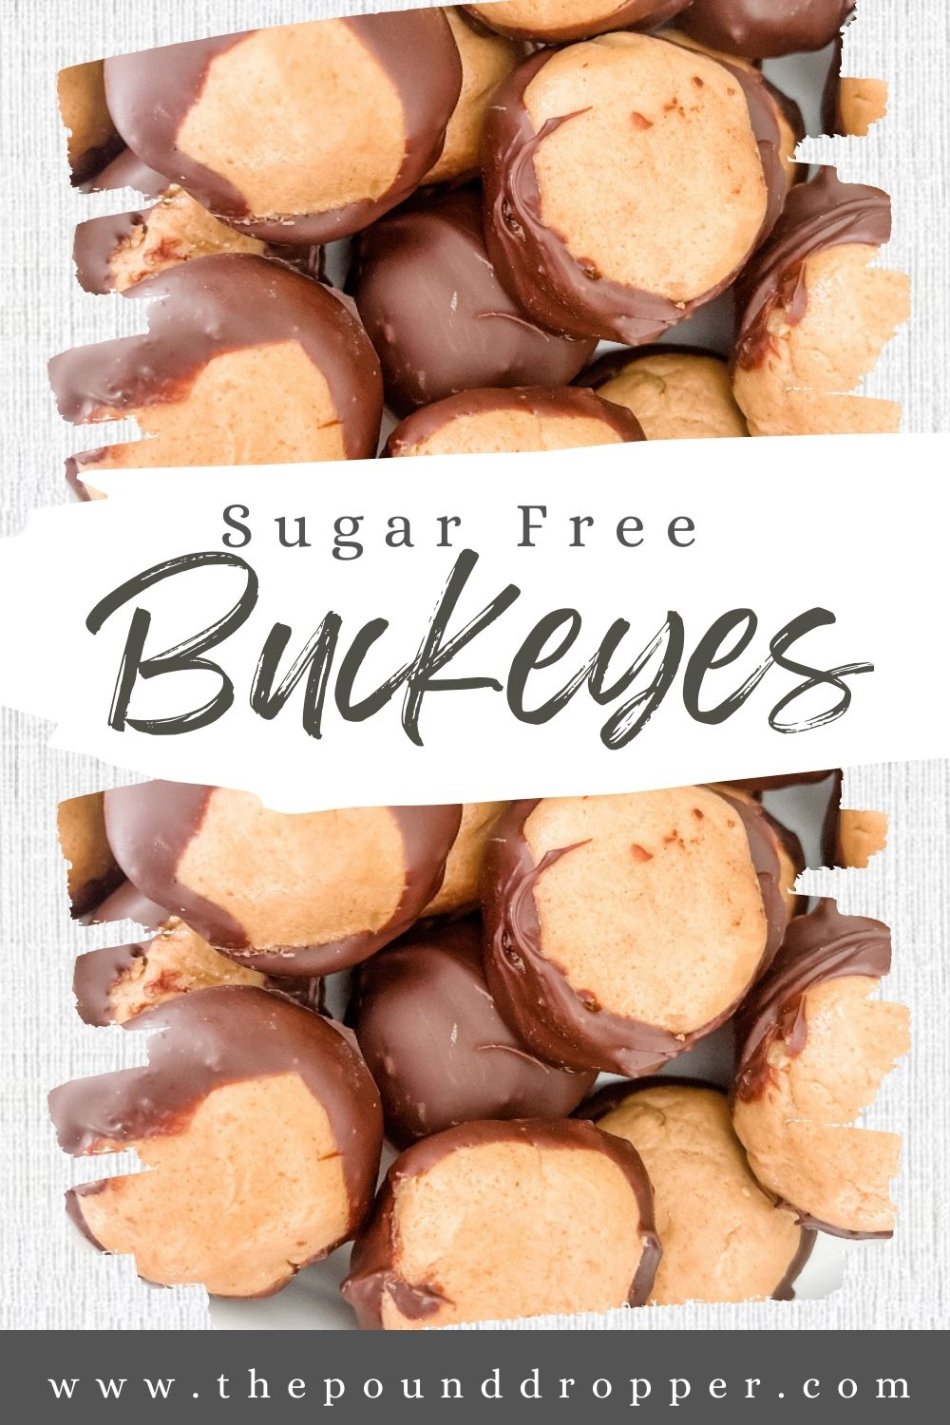 These Easy Sugar Free Buckeyes are the ultimate homemade sugar-free treat! Smooth peanut butter, Lakanto's Confectioners sweetener, and chocolate come together to create a ball of deliciousness! via @pounddropper